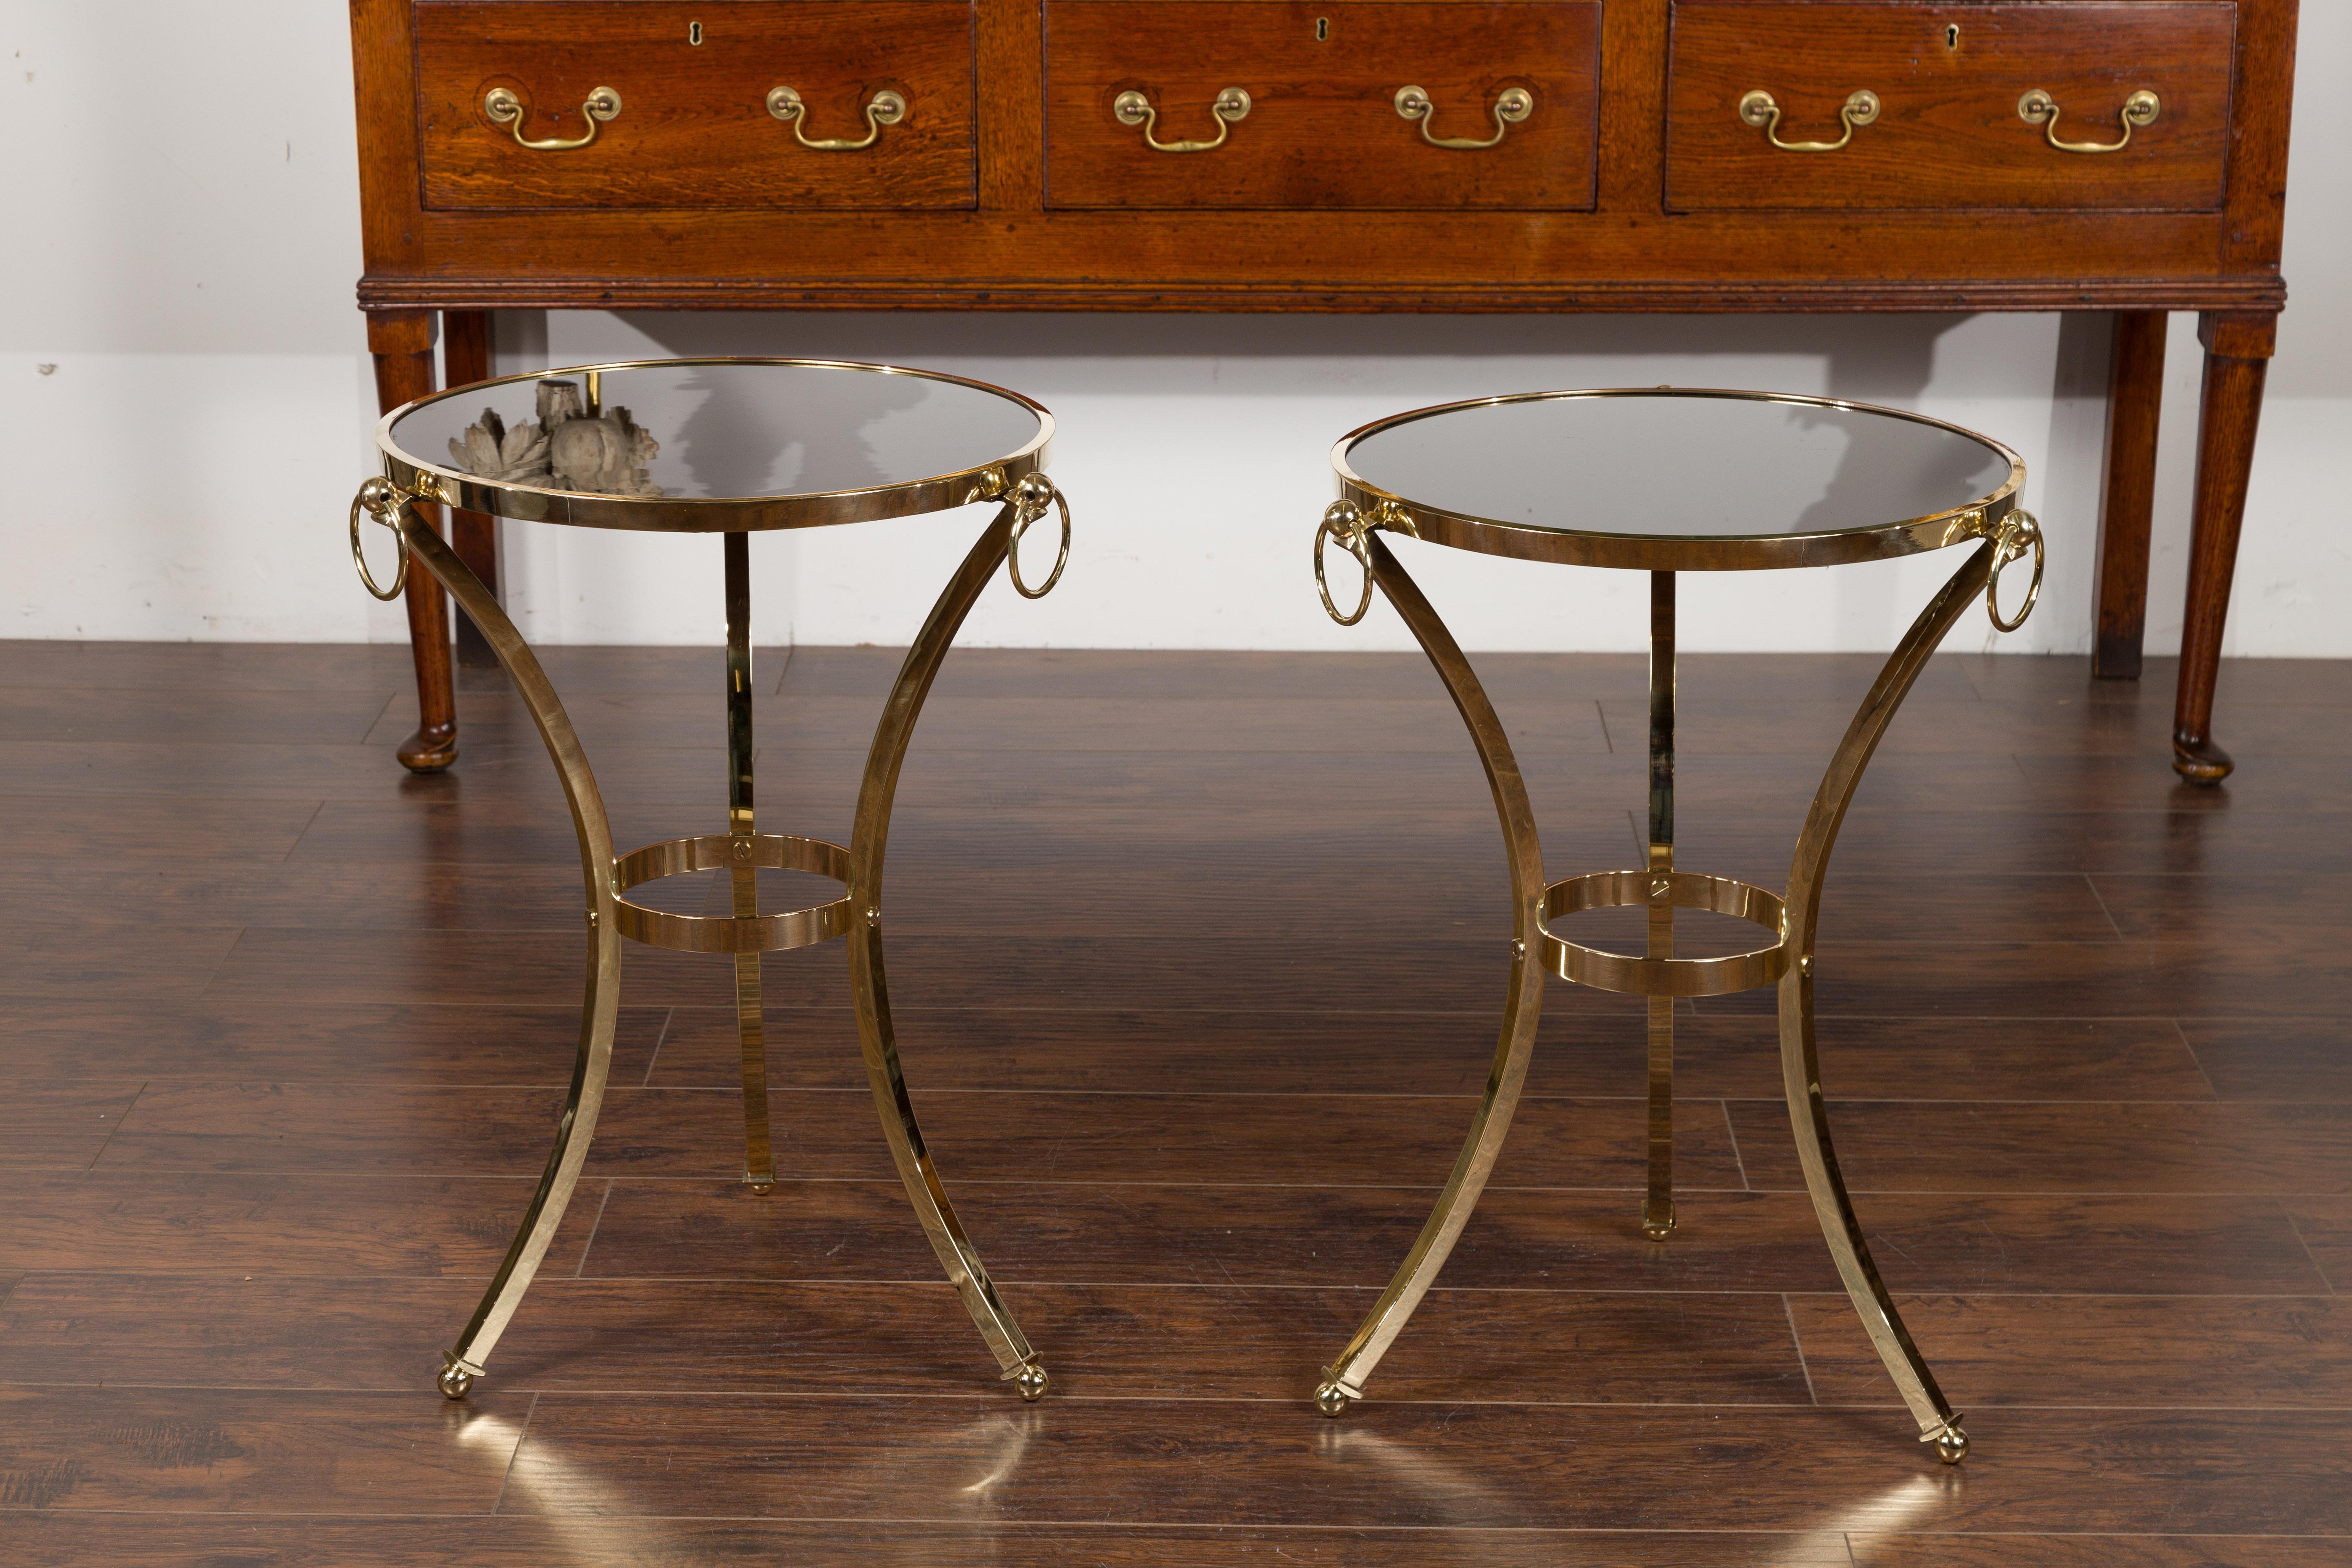 A pair of vintage Italian brass tables from the mid-20th century, with black mirrored tops and ring motifs. Created in Italy during the midcentury period, each of this pair of side tables features a circular round top showcasing a black mirror. The